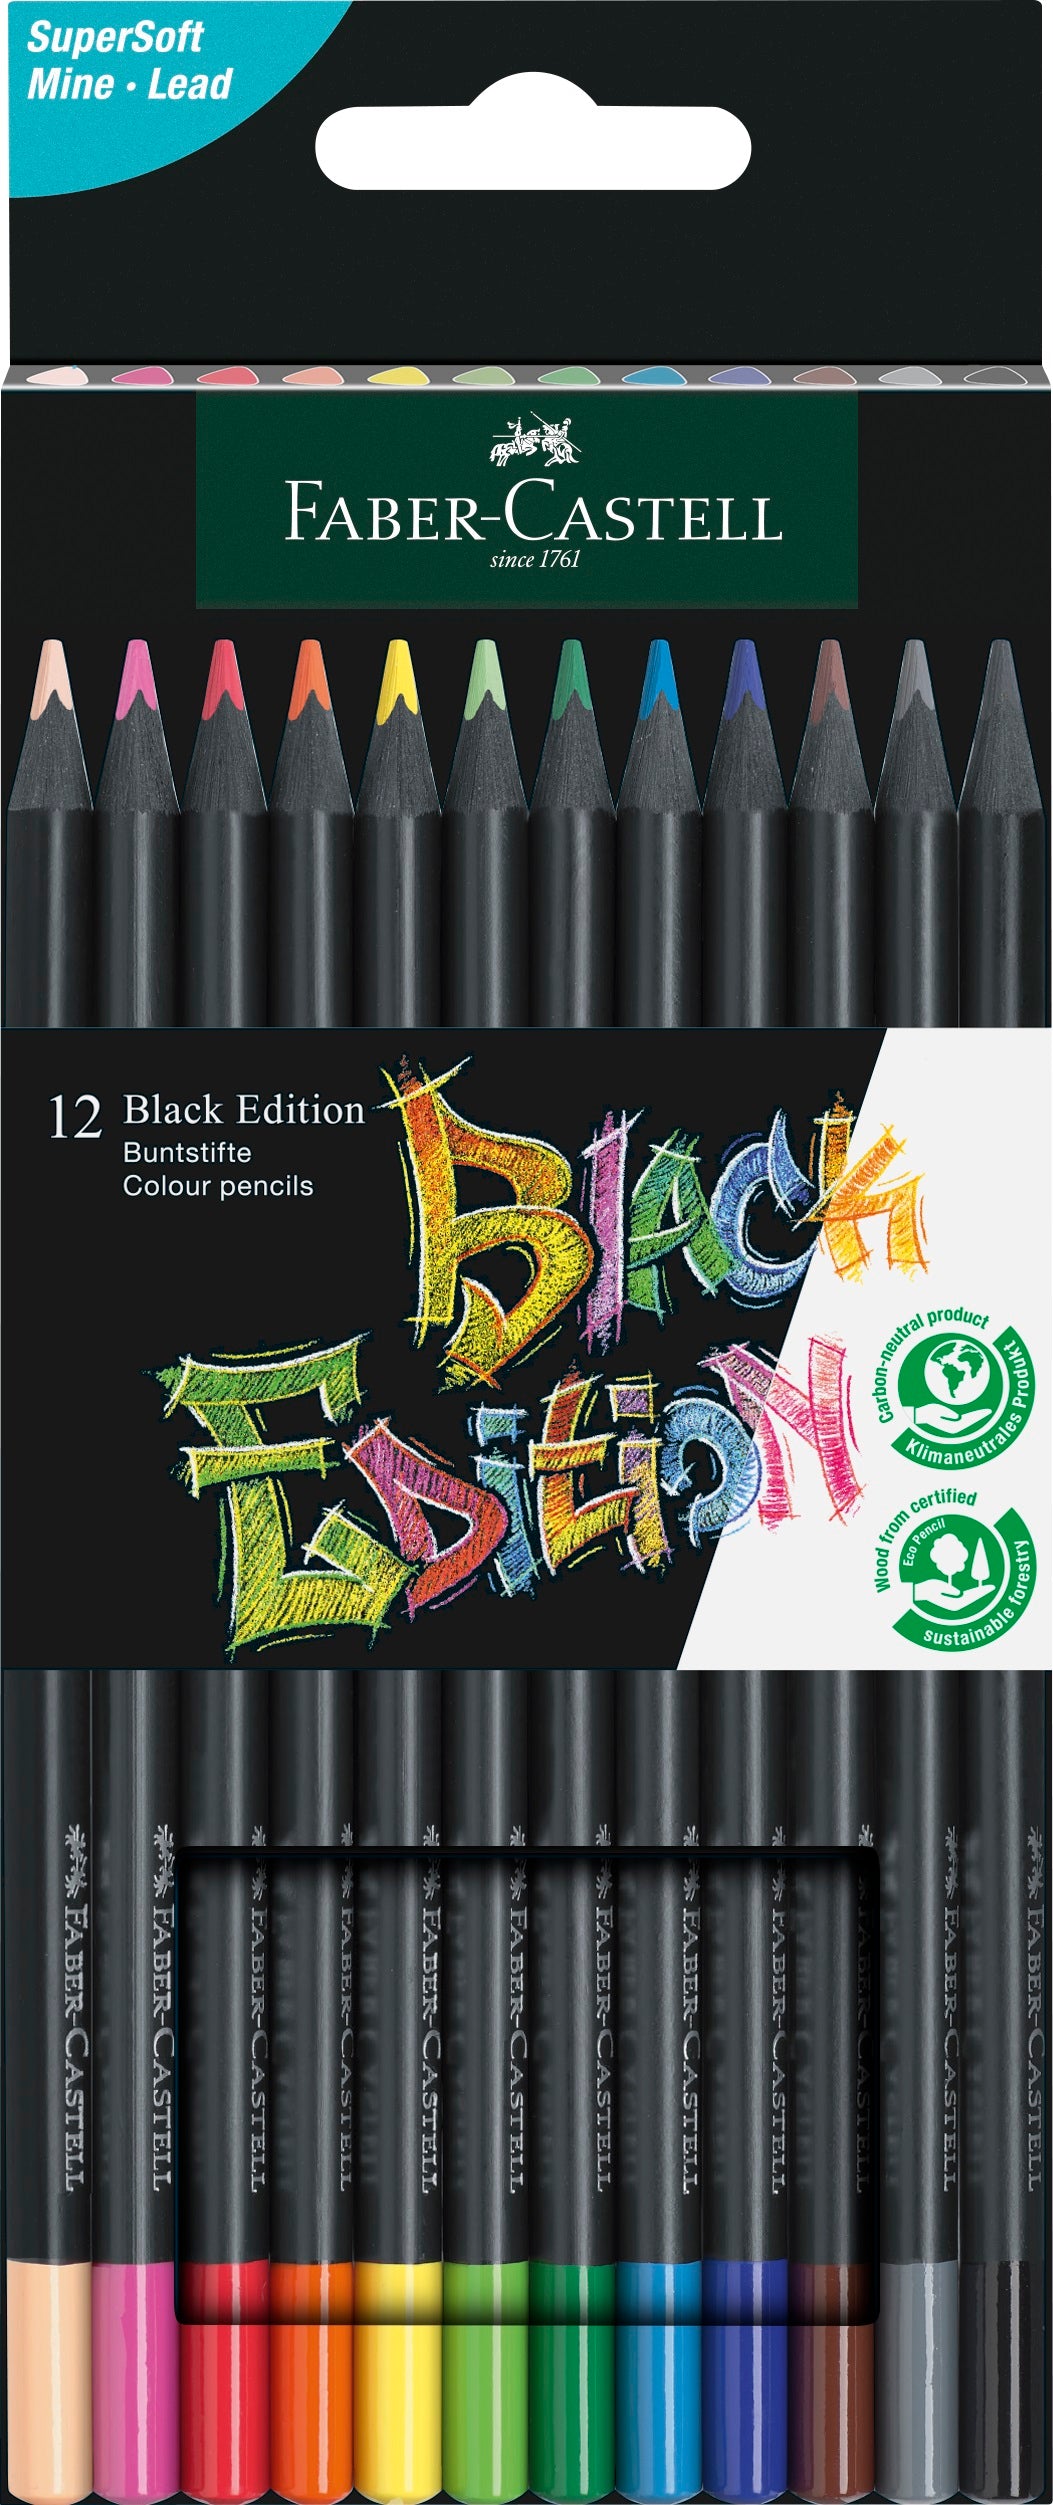 Retail packaging for a pack of 12 colour pencils by Faber Castell. The packaging is black with a cut out showing the pencils inside plus an illustration of them in use.